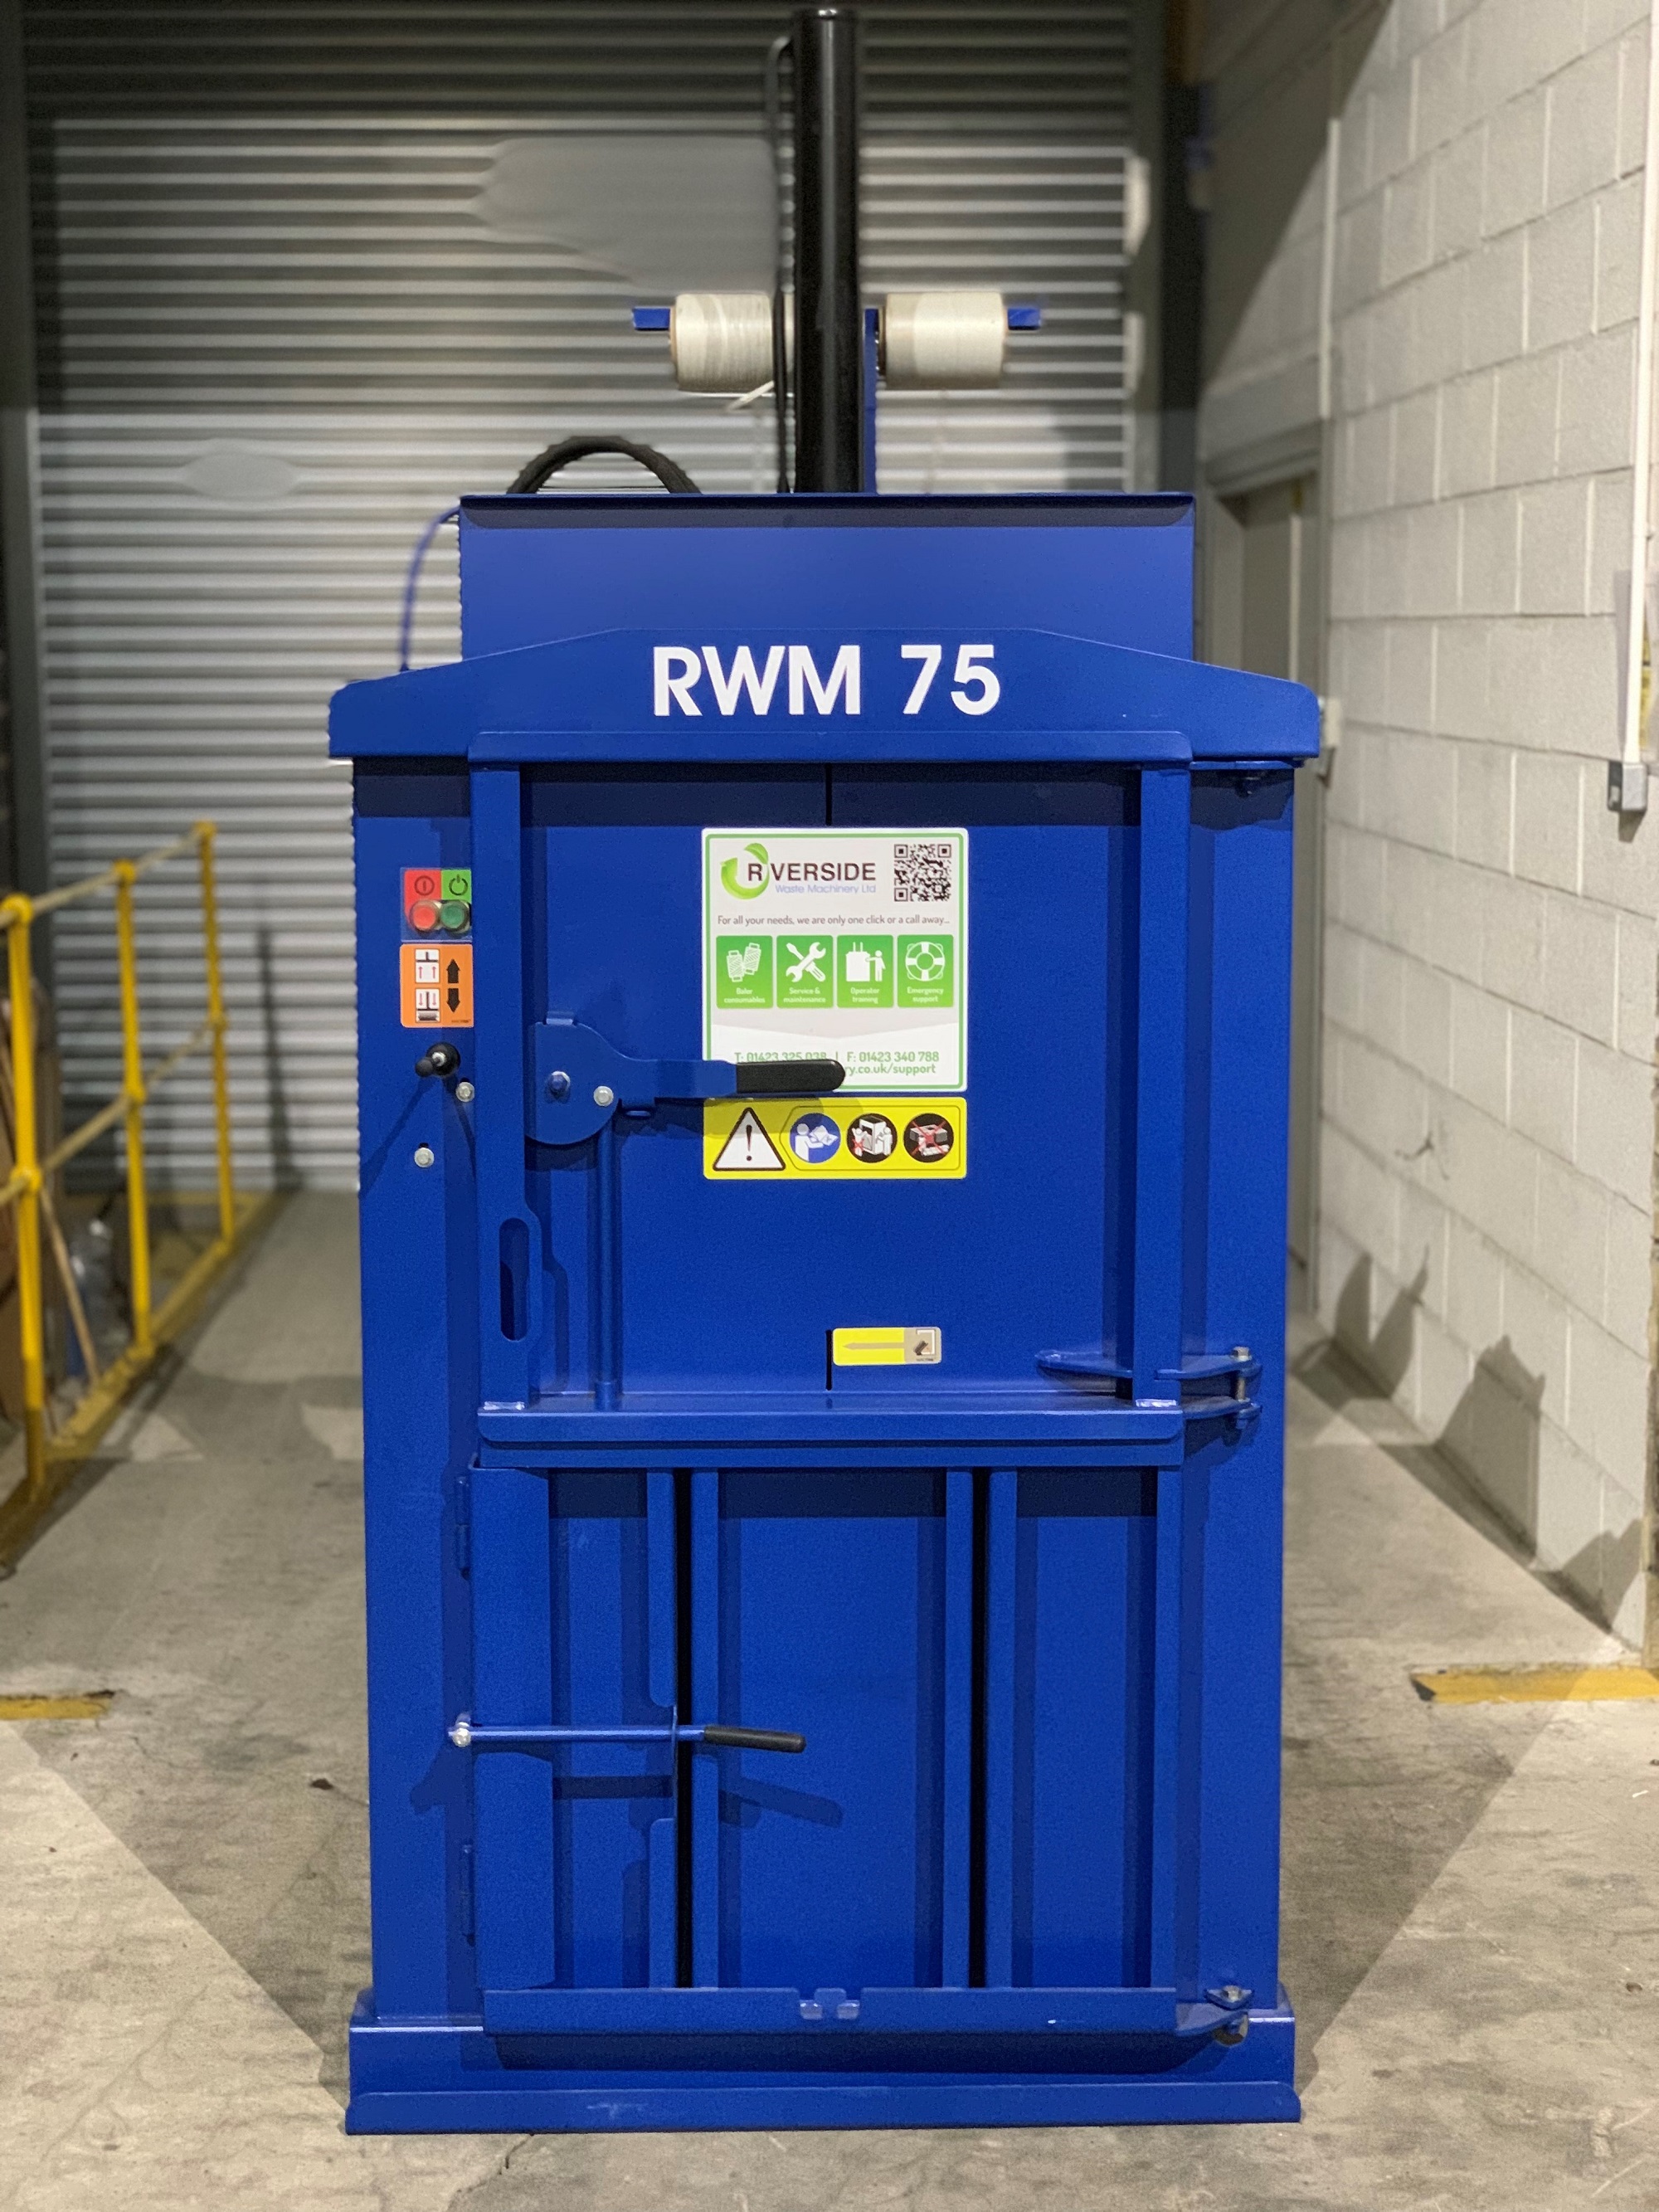 Machine of the month – May – RWM 75